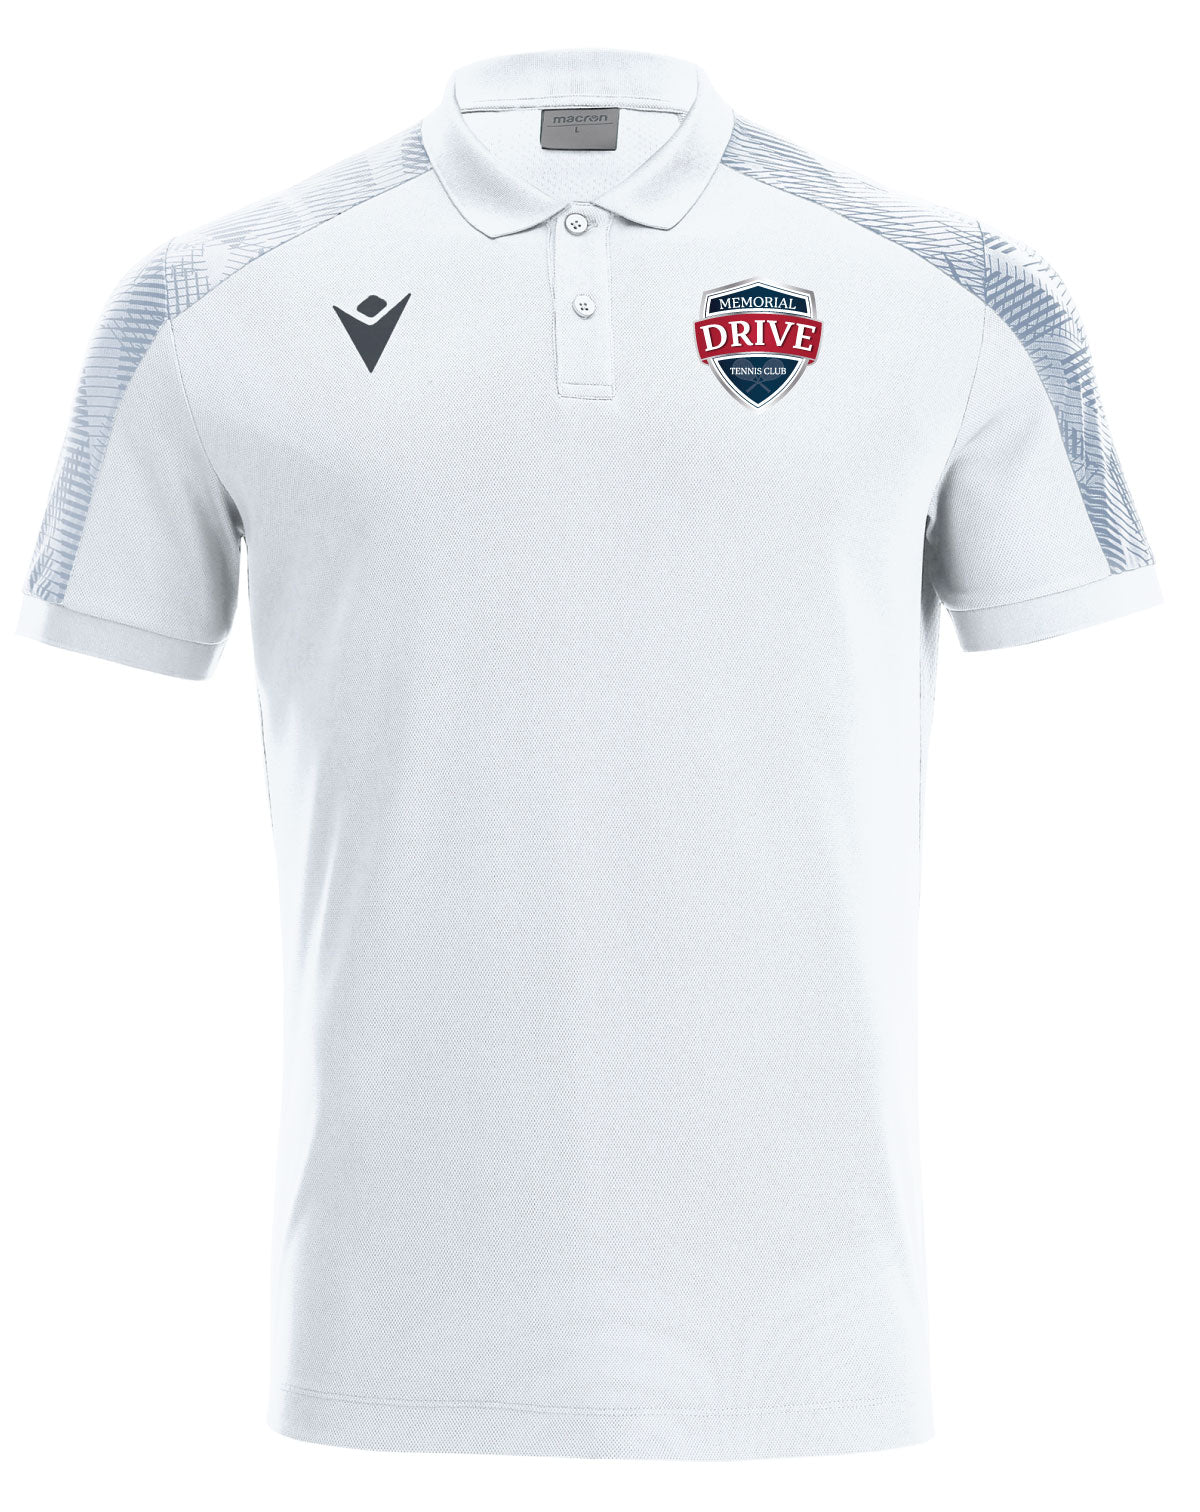 THE DRIVE - MATCH PLAY ROCK POLO WHITE (UNISEX)